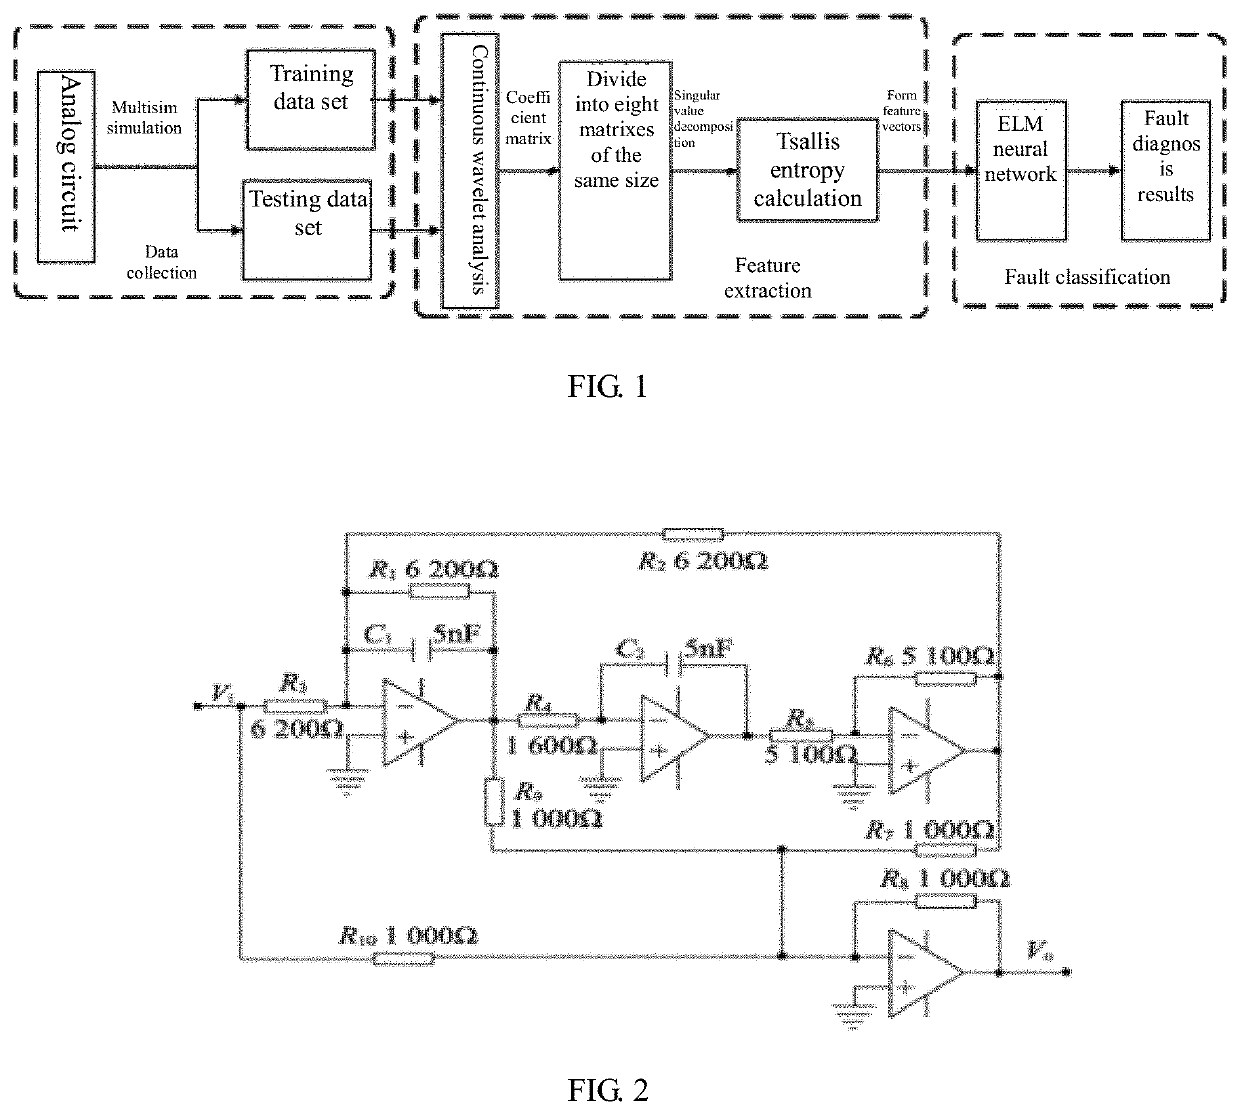 Analog-circuit fault diagnosis method based on continuous wavelet analysis and elm network